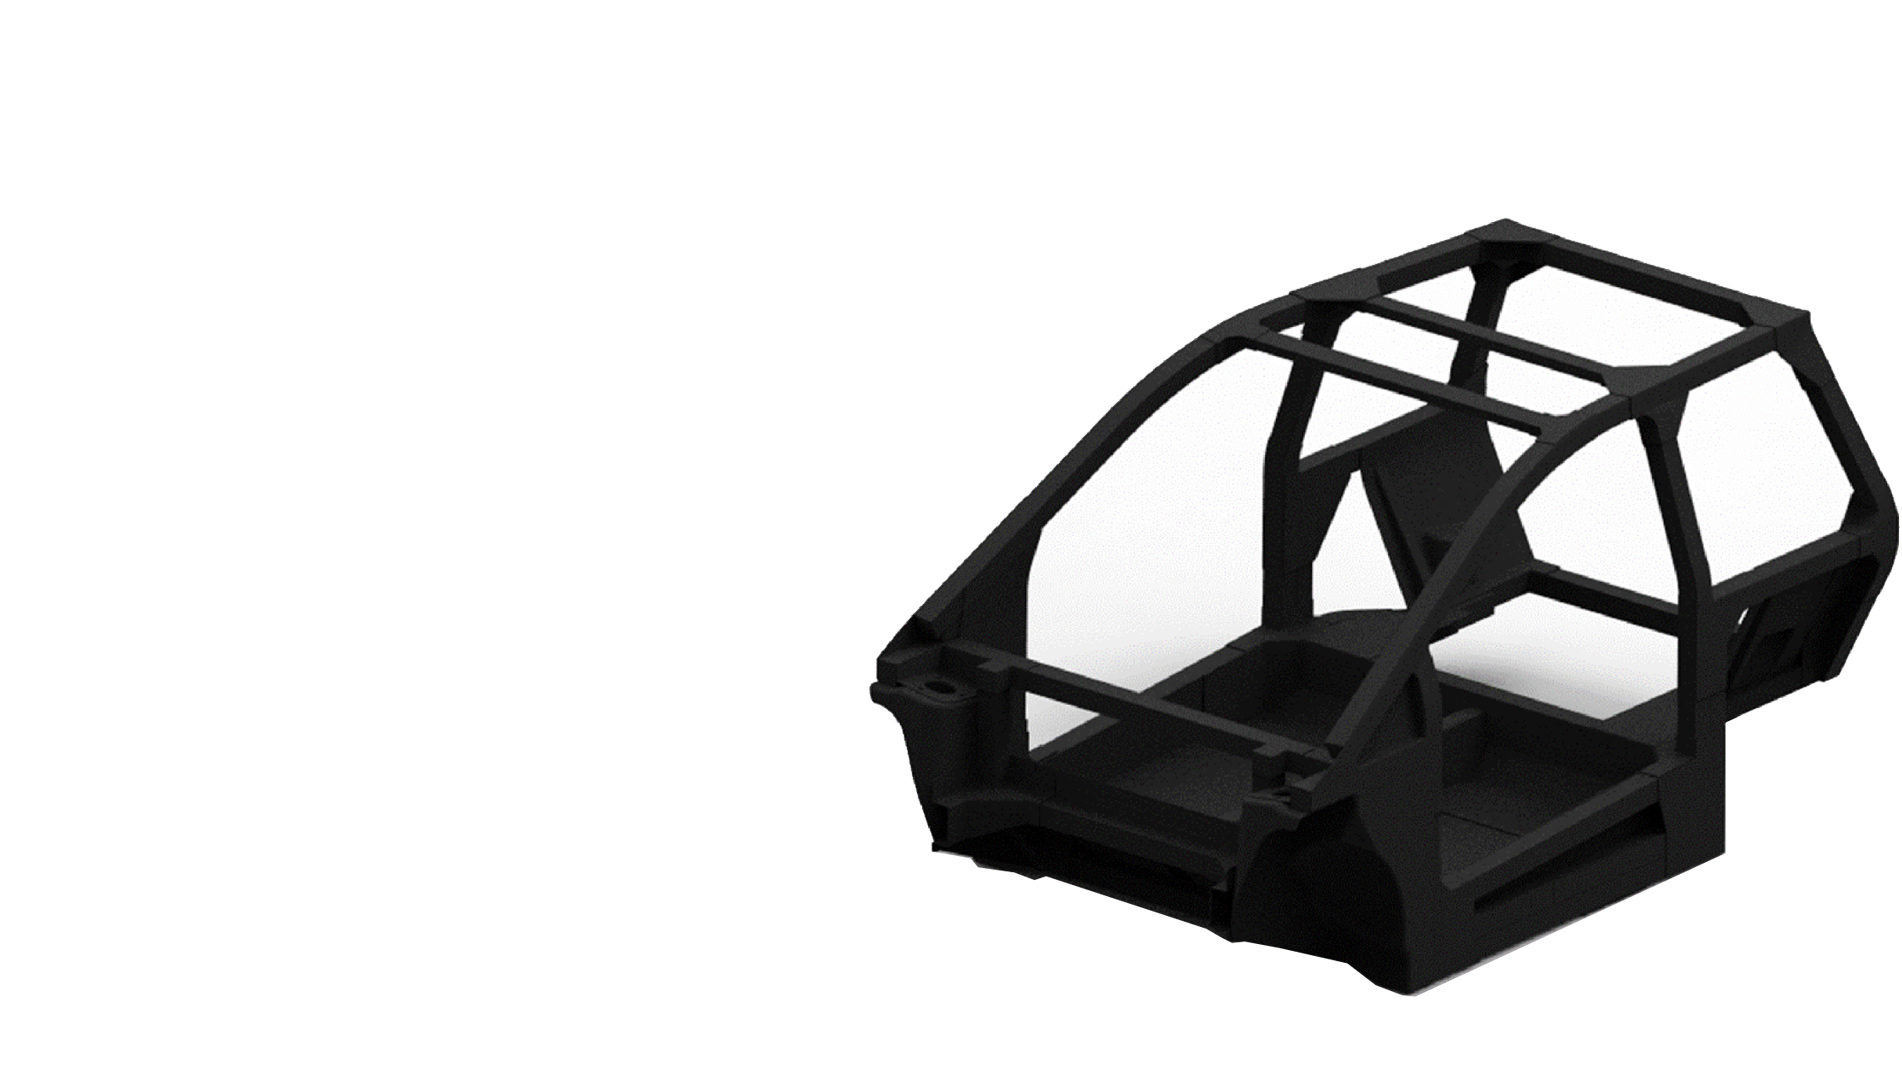 The Car structural design with Carbon Fiber